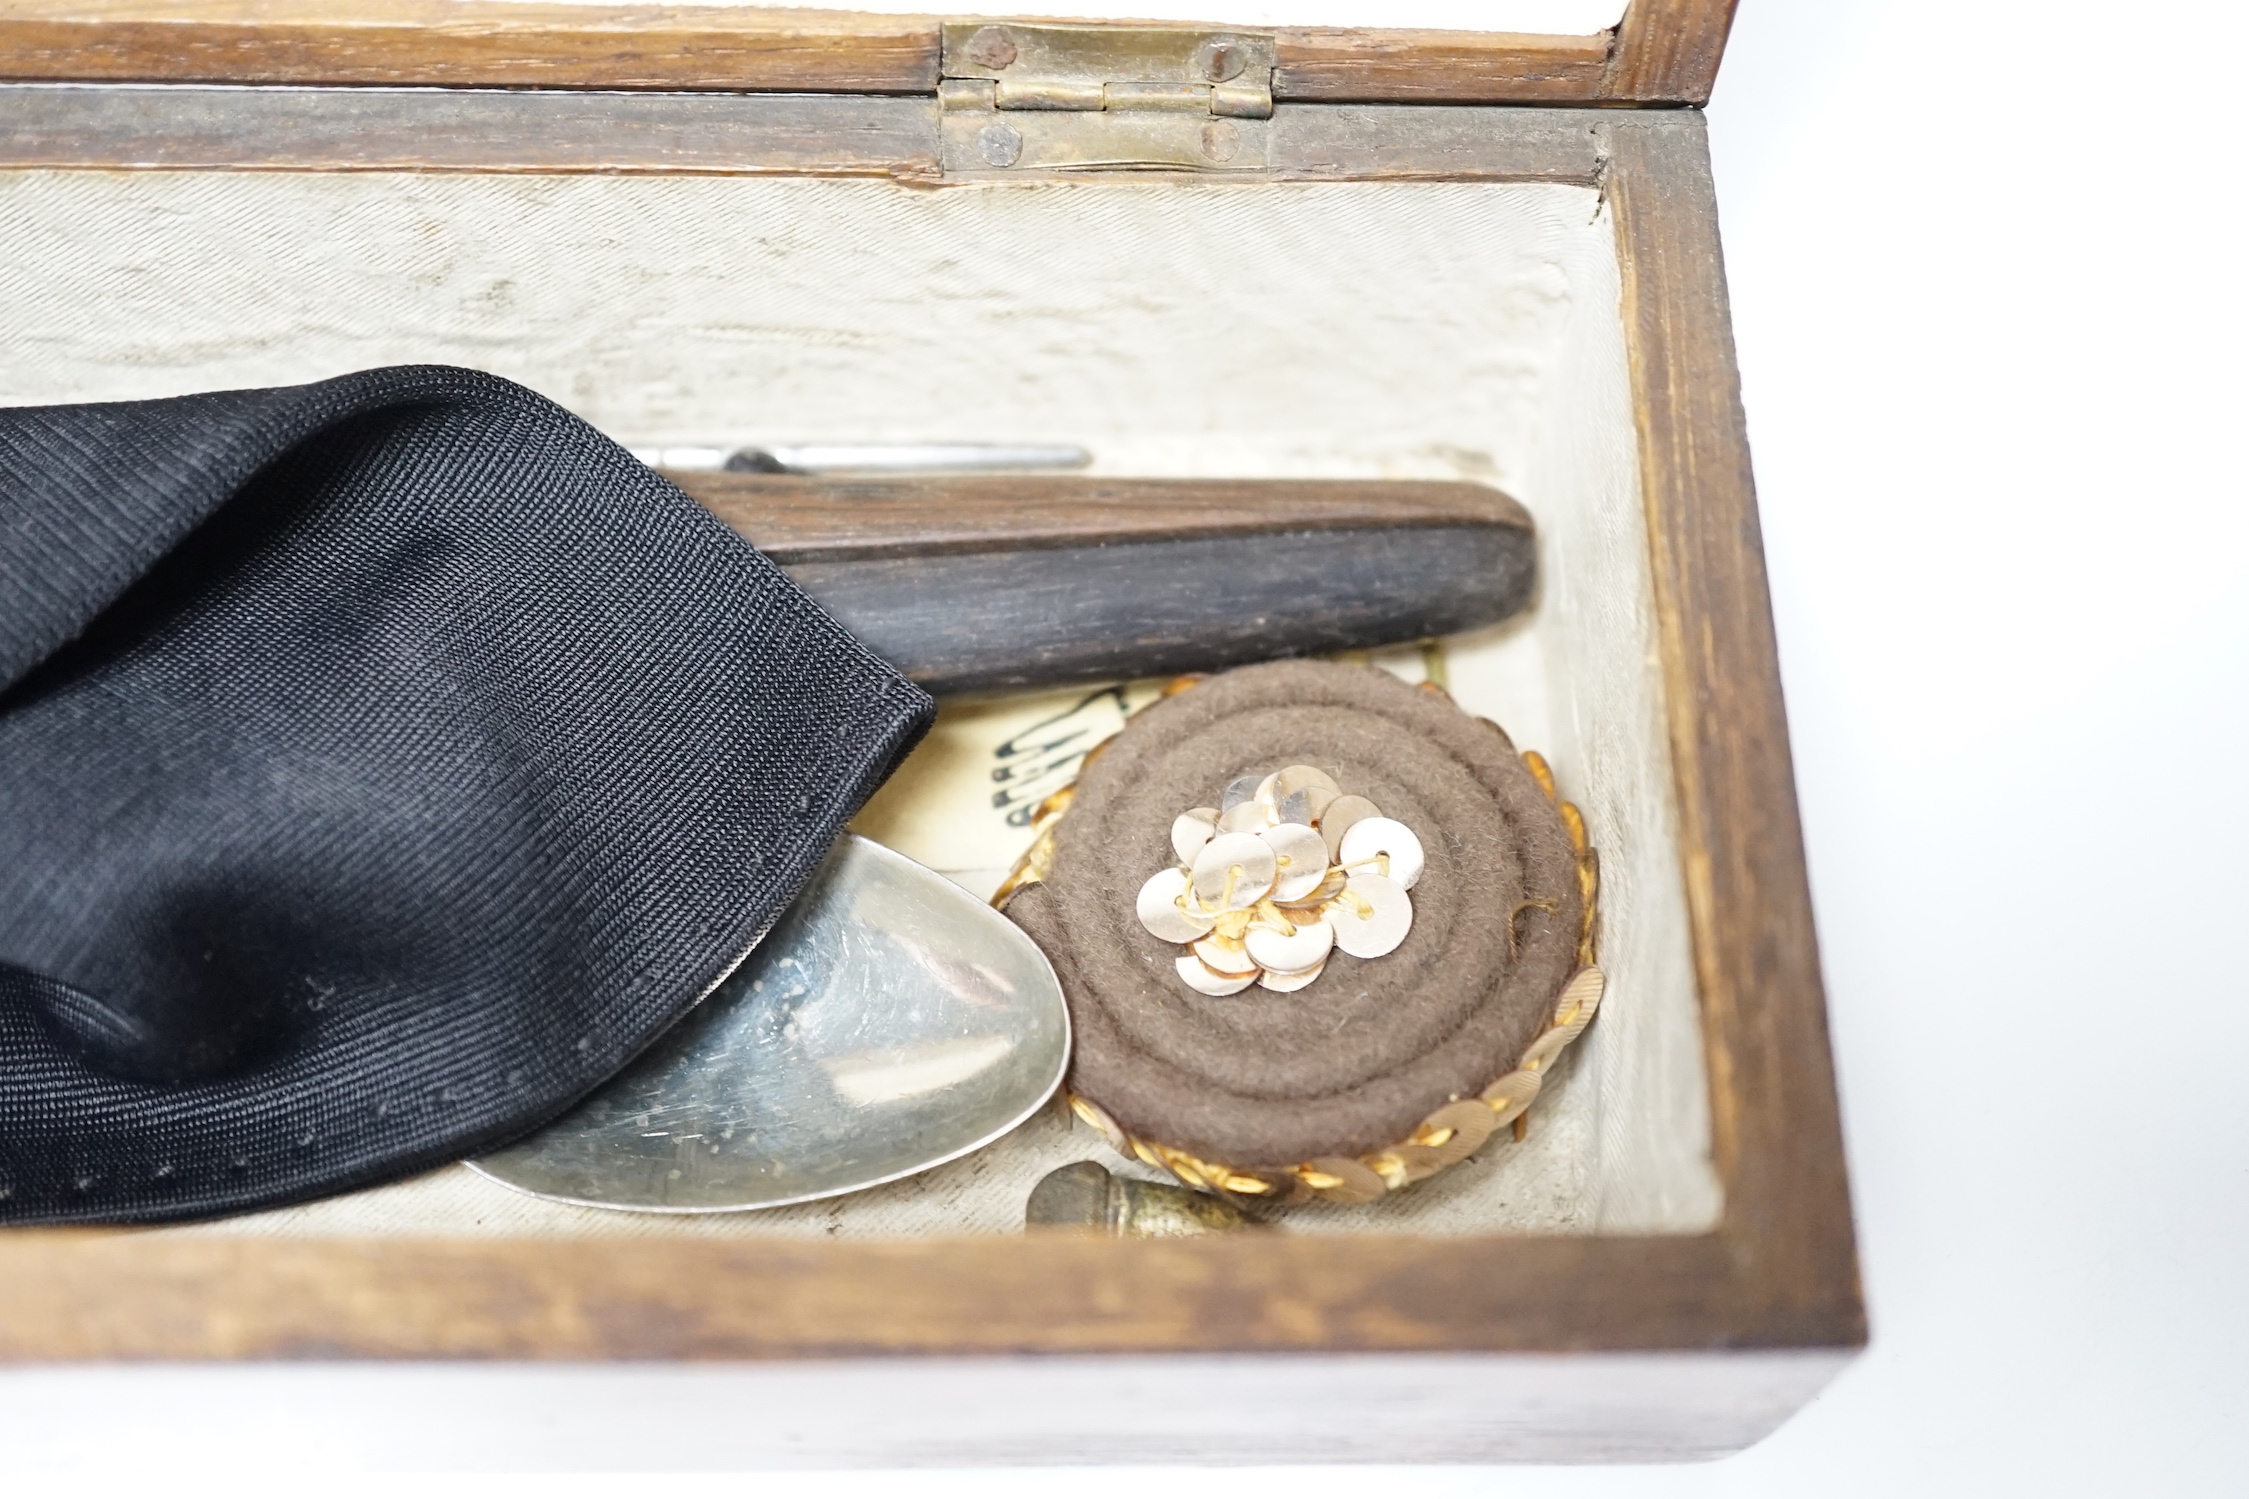 A glove box containing a boxwood foot-measure, two candle snuffers, a silver teaspoon etc